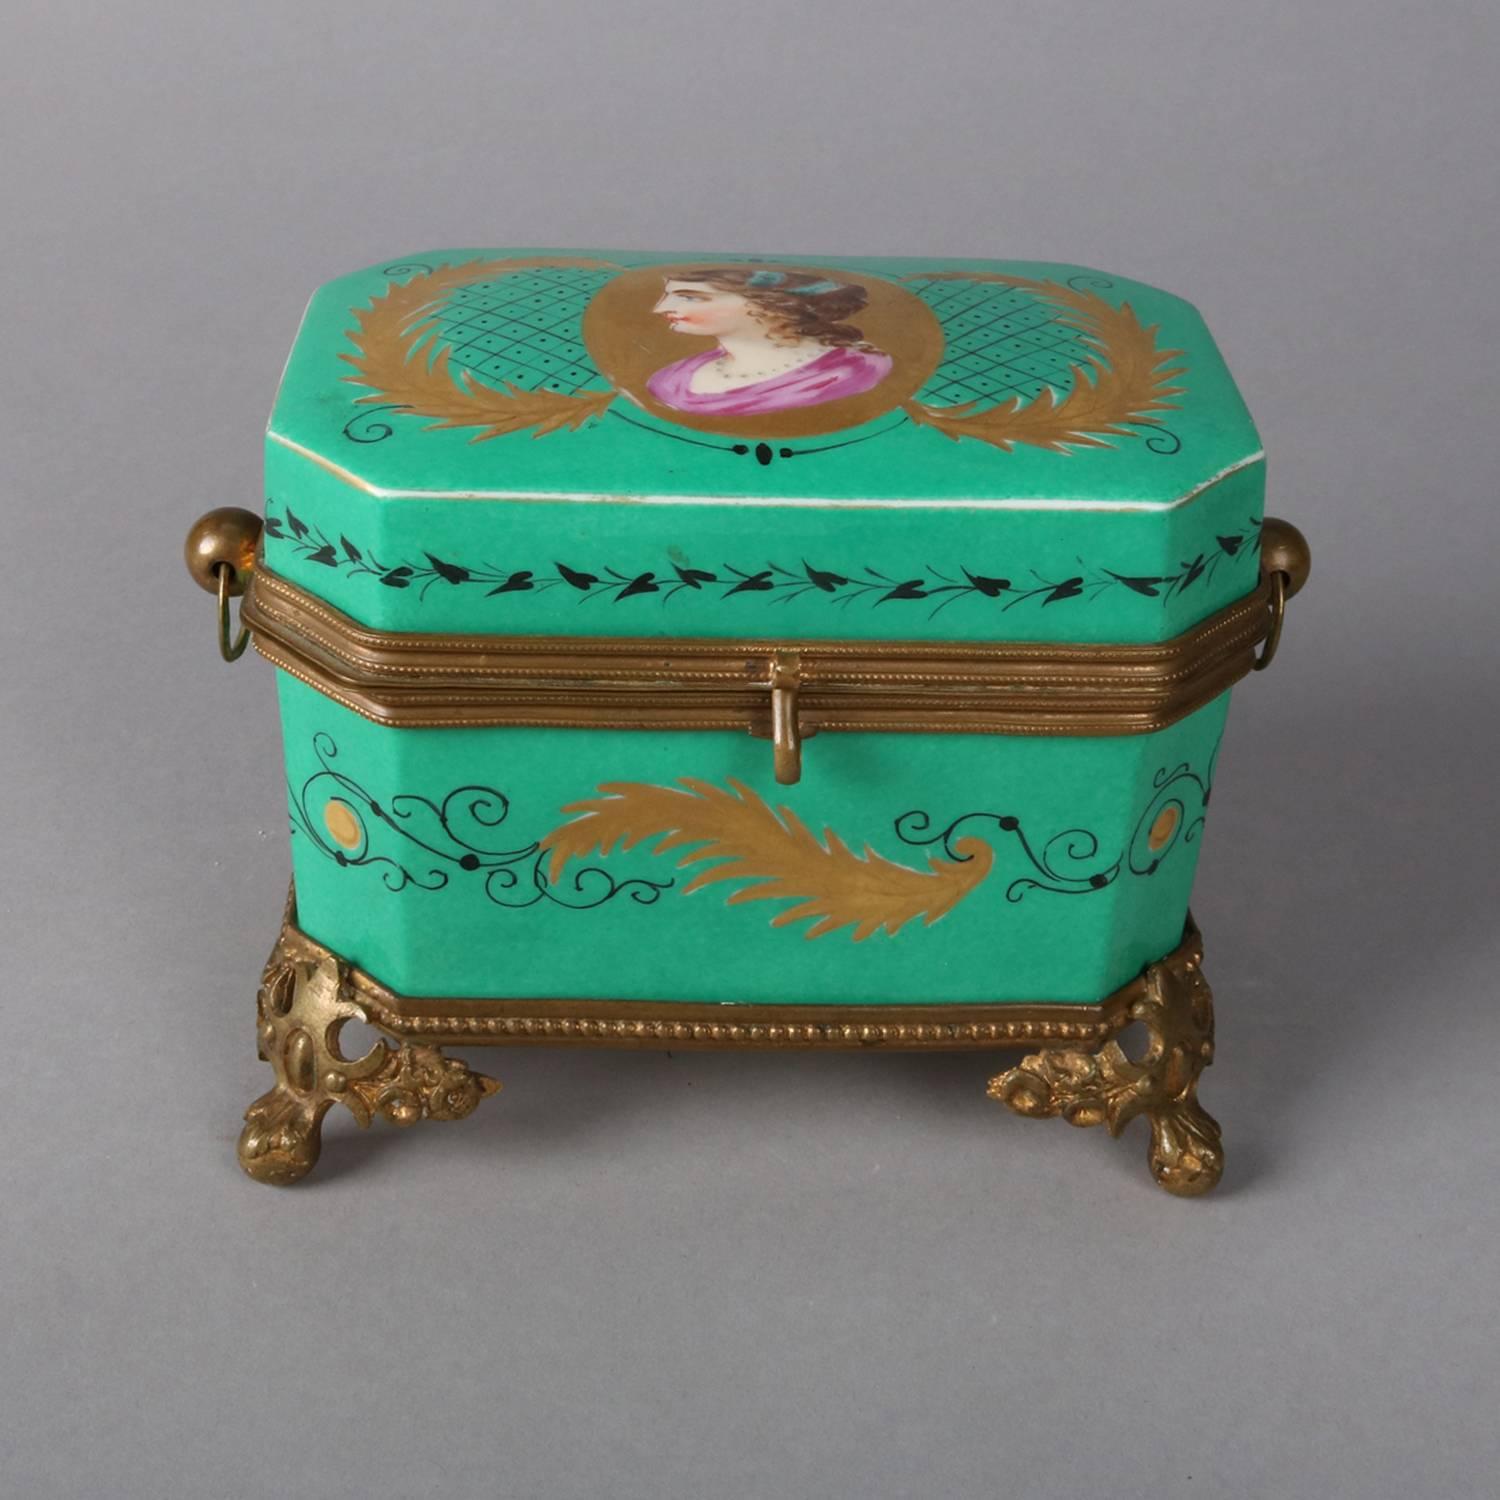 Antique French Sevres school dresser box features hand painted portrait reserve on lid with gilt and painted scroll and foliate decoration, seated on foliate cast bronze footed base and with bronze mounts, 19th century

Measures: 4.5